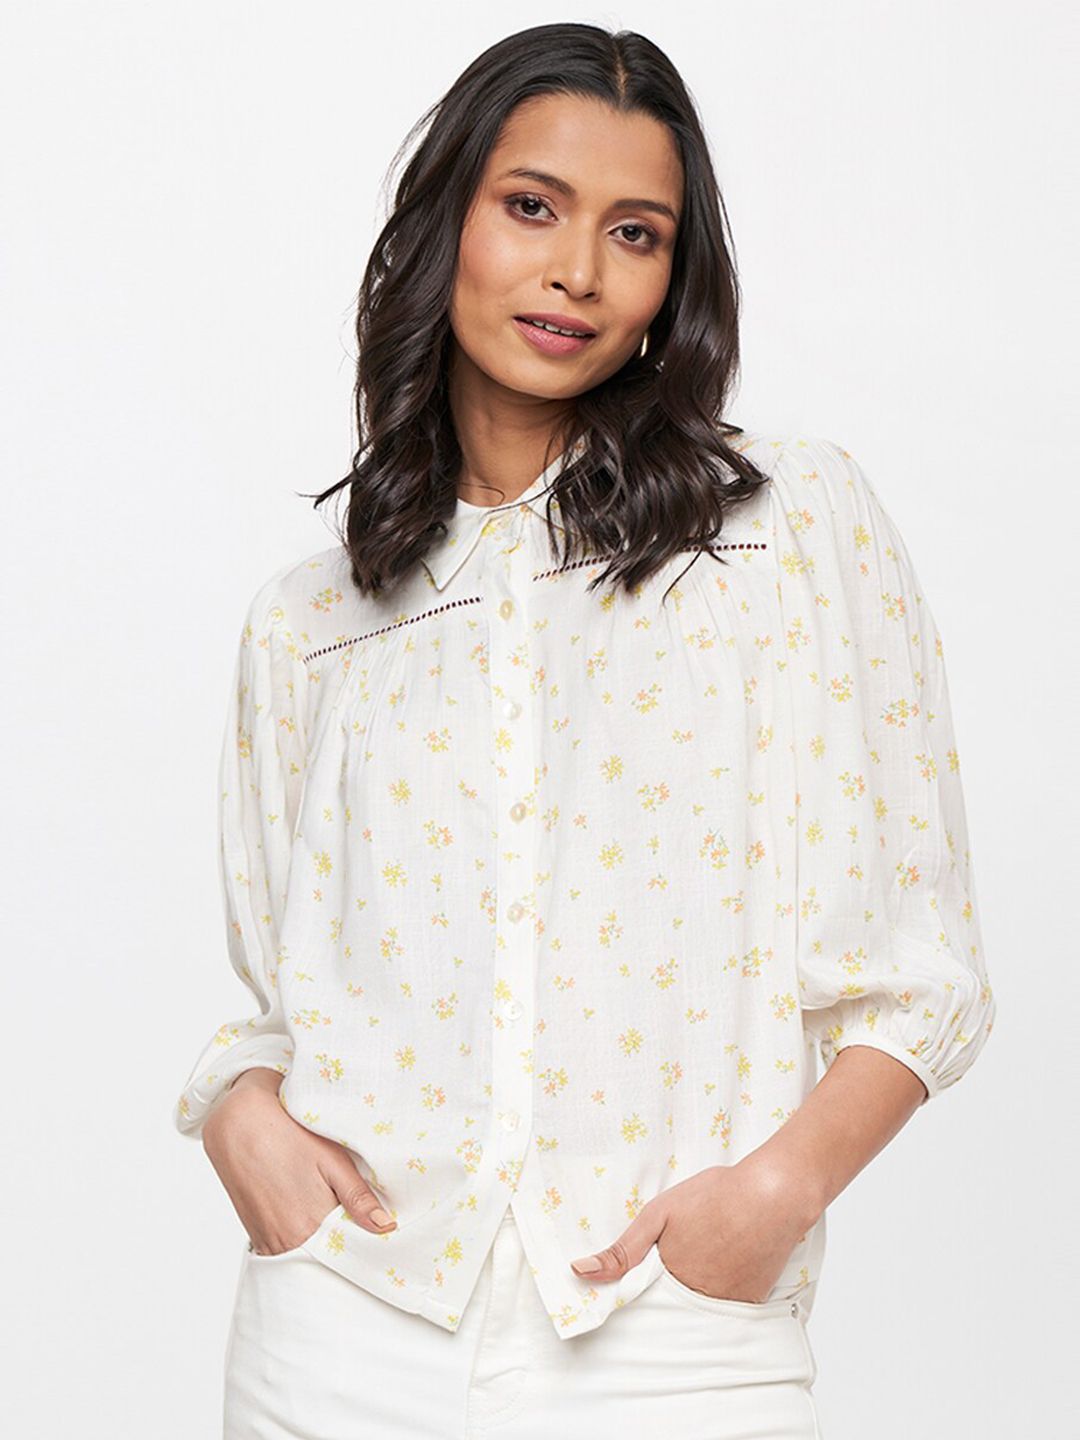 AND White Floral Printed Cotton Shirt Style Top Price in India